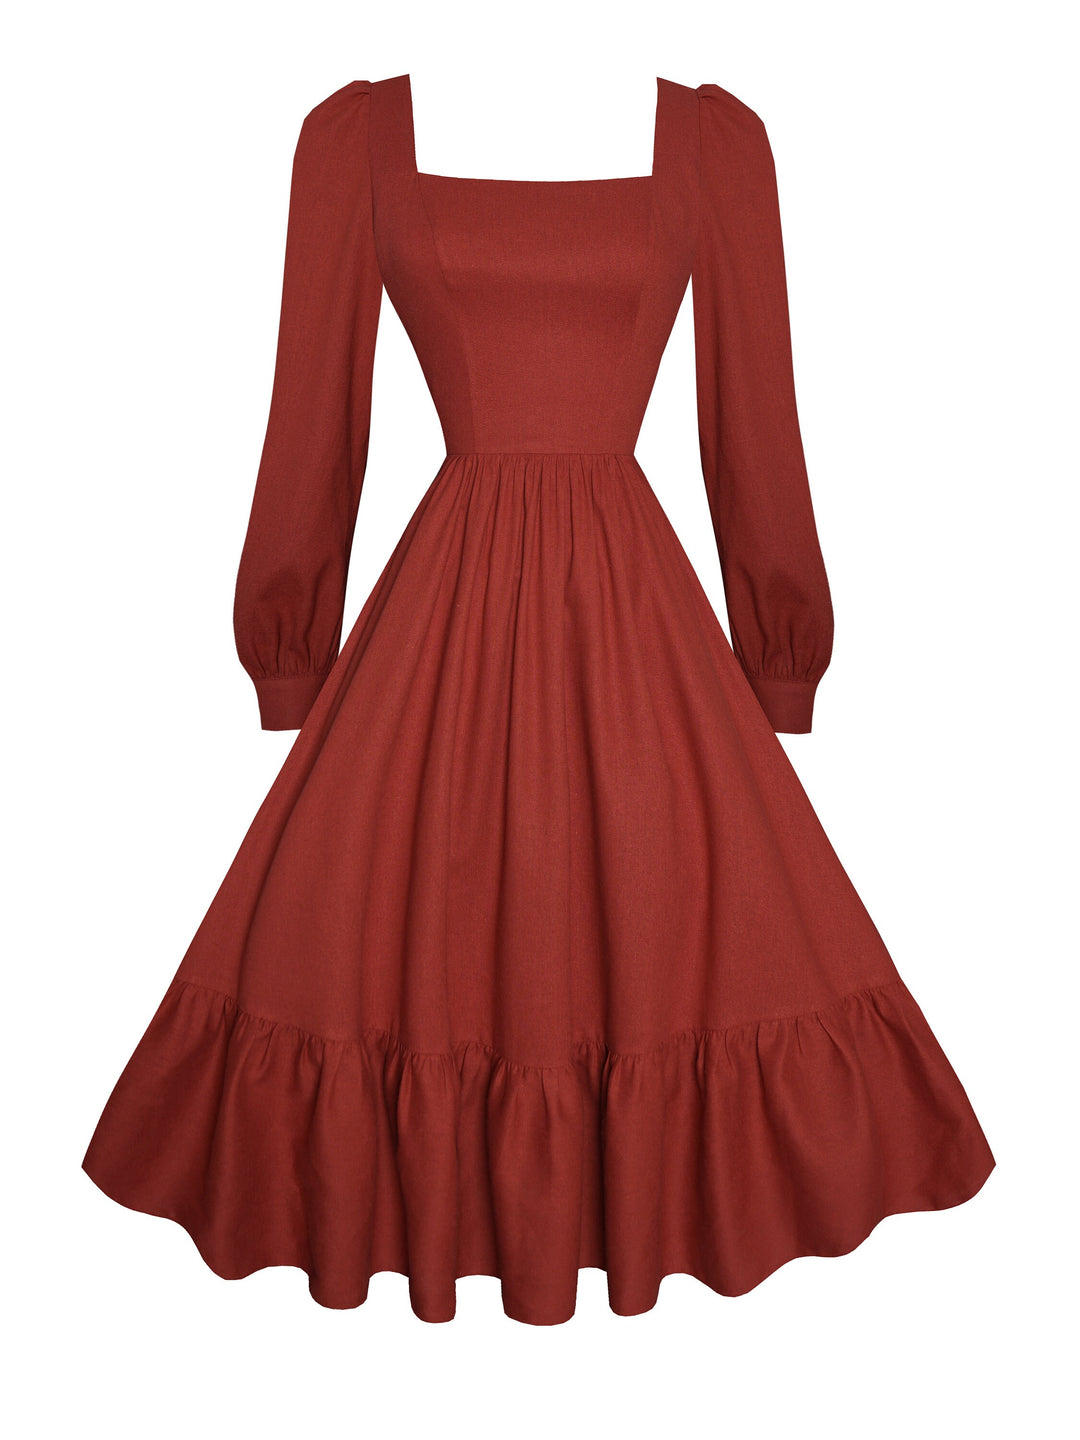 MTO - Mary Dress in Brick Red Linen